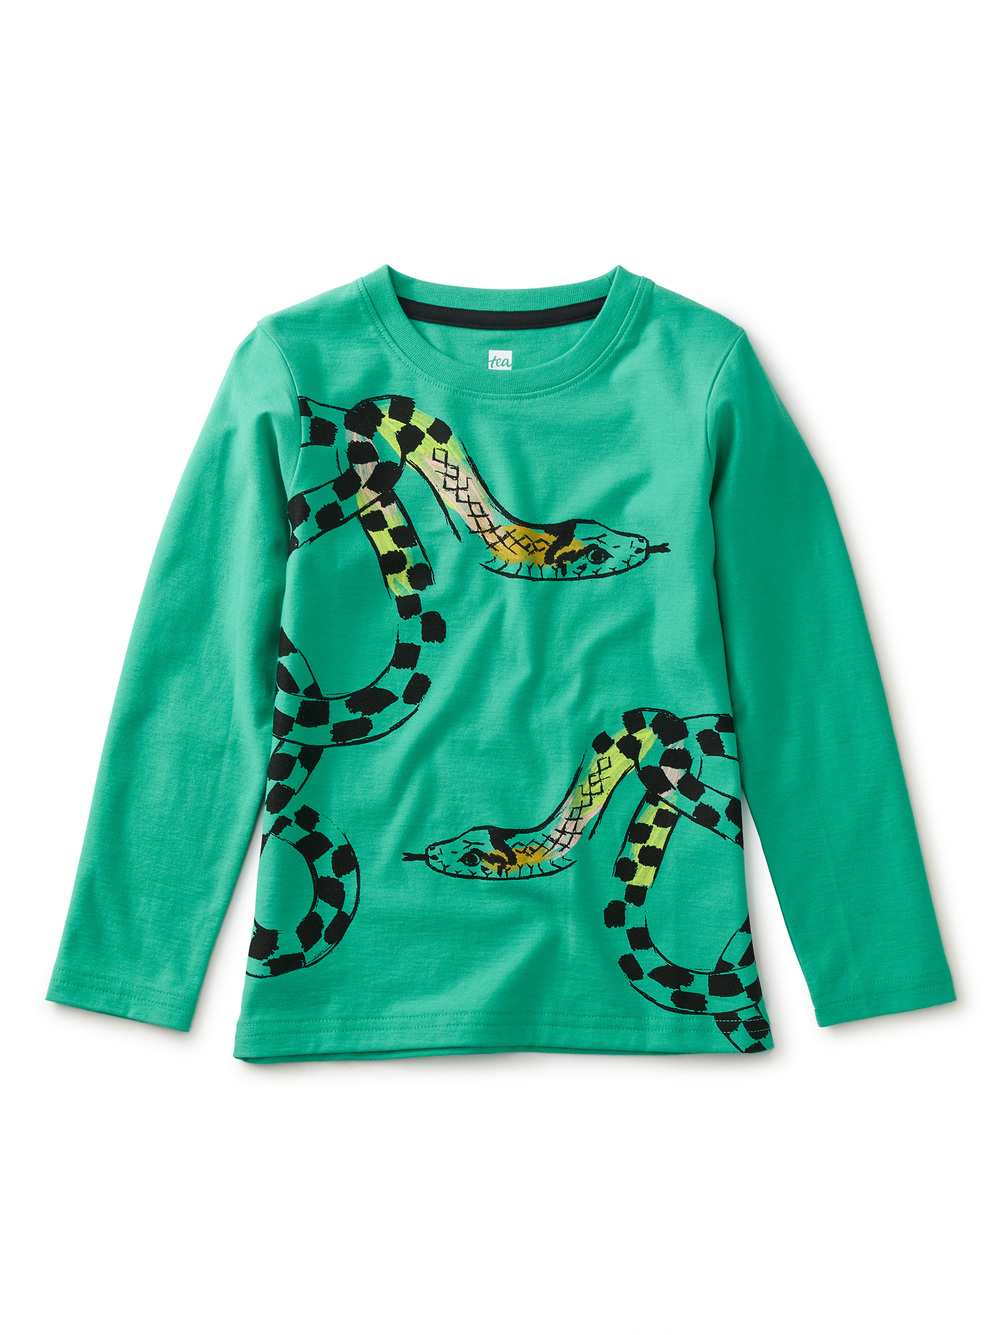 Slithering Snakes Graphic Tee